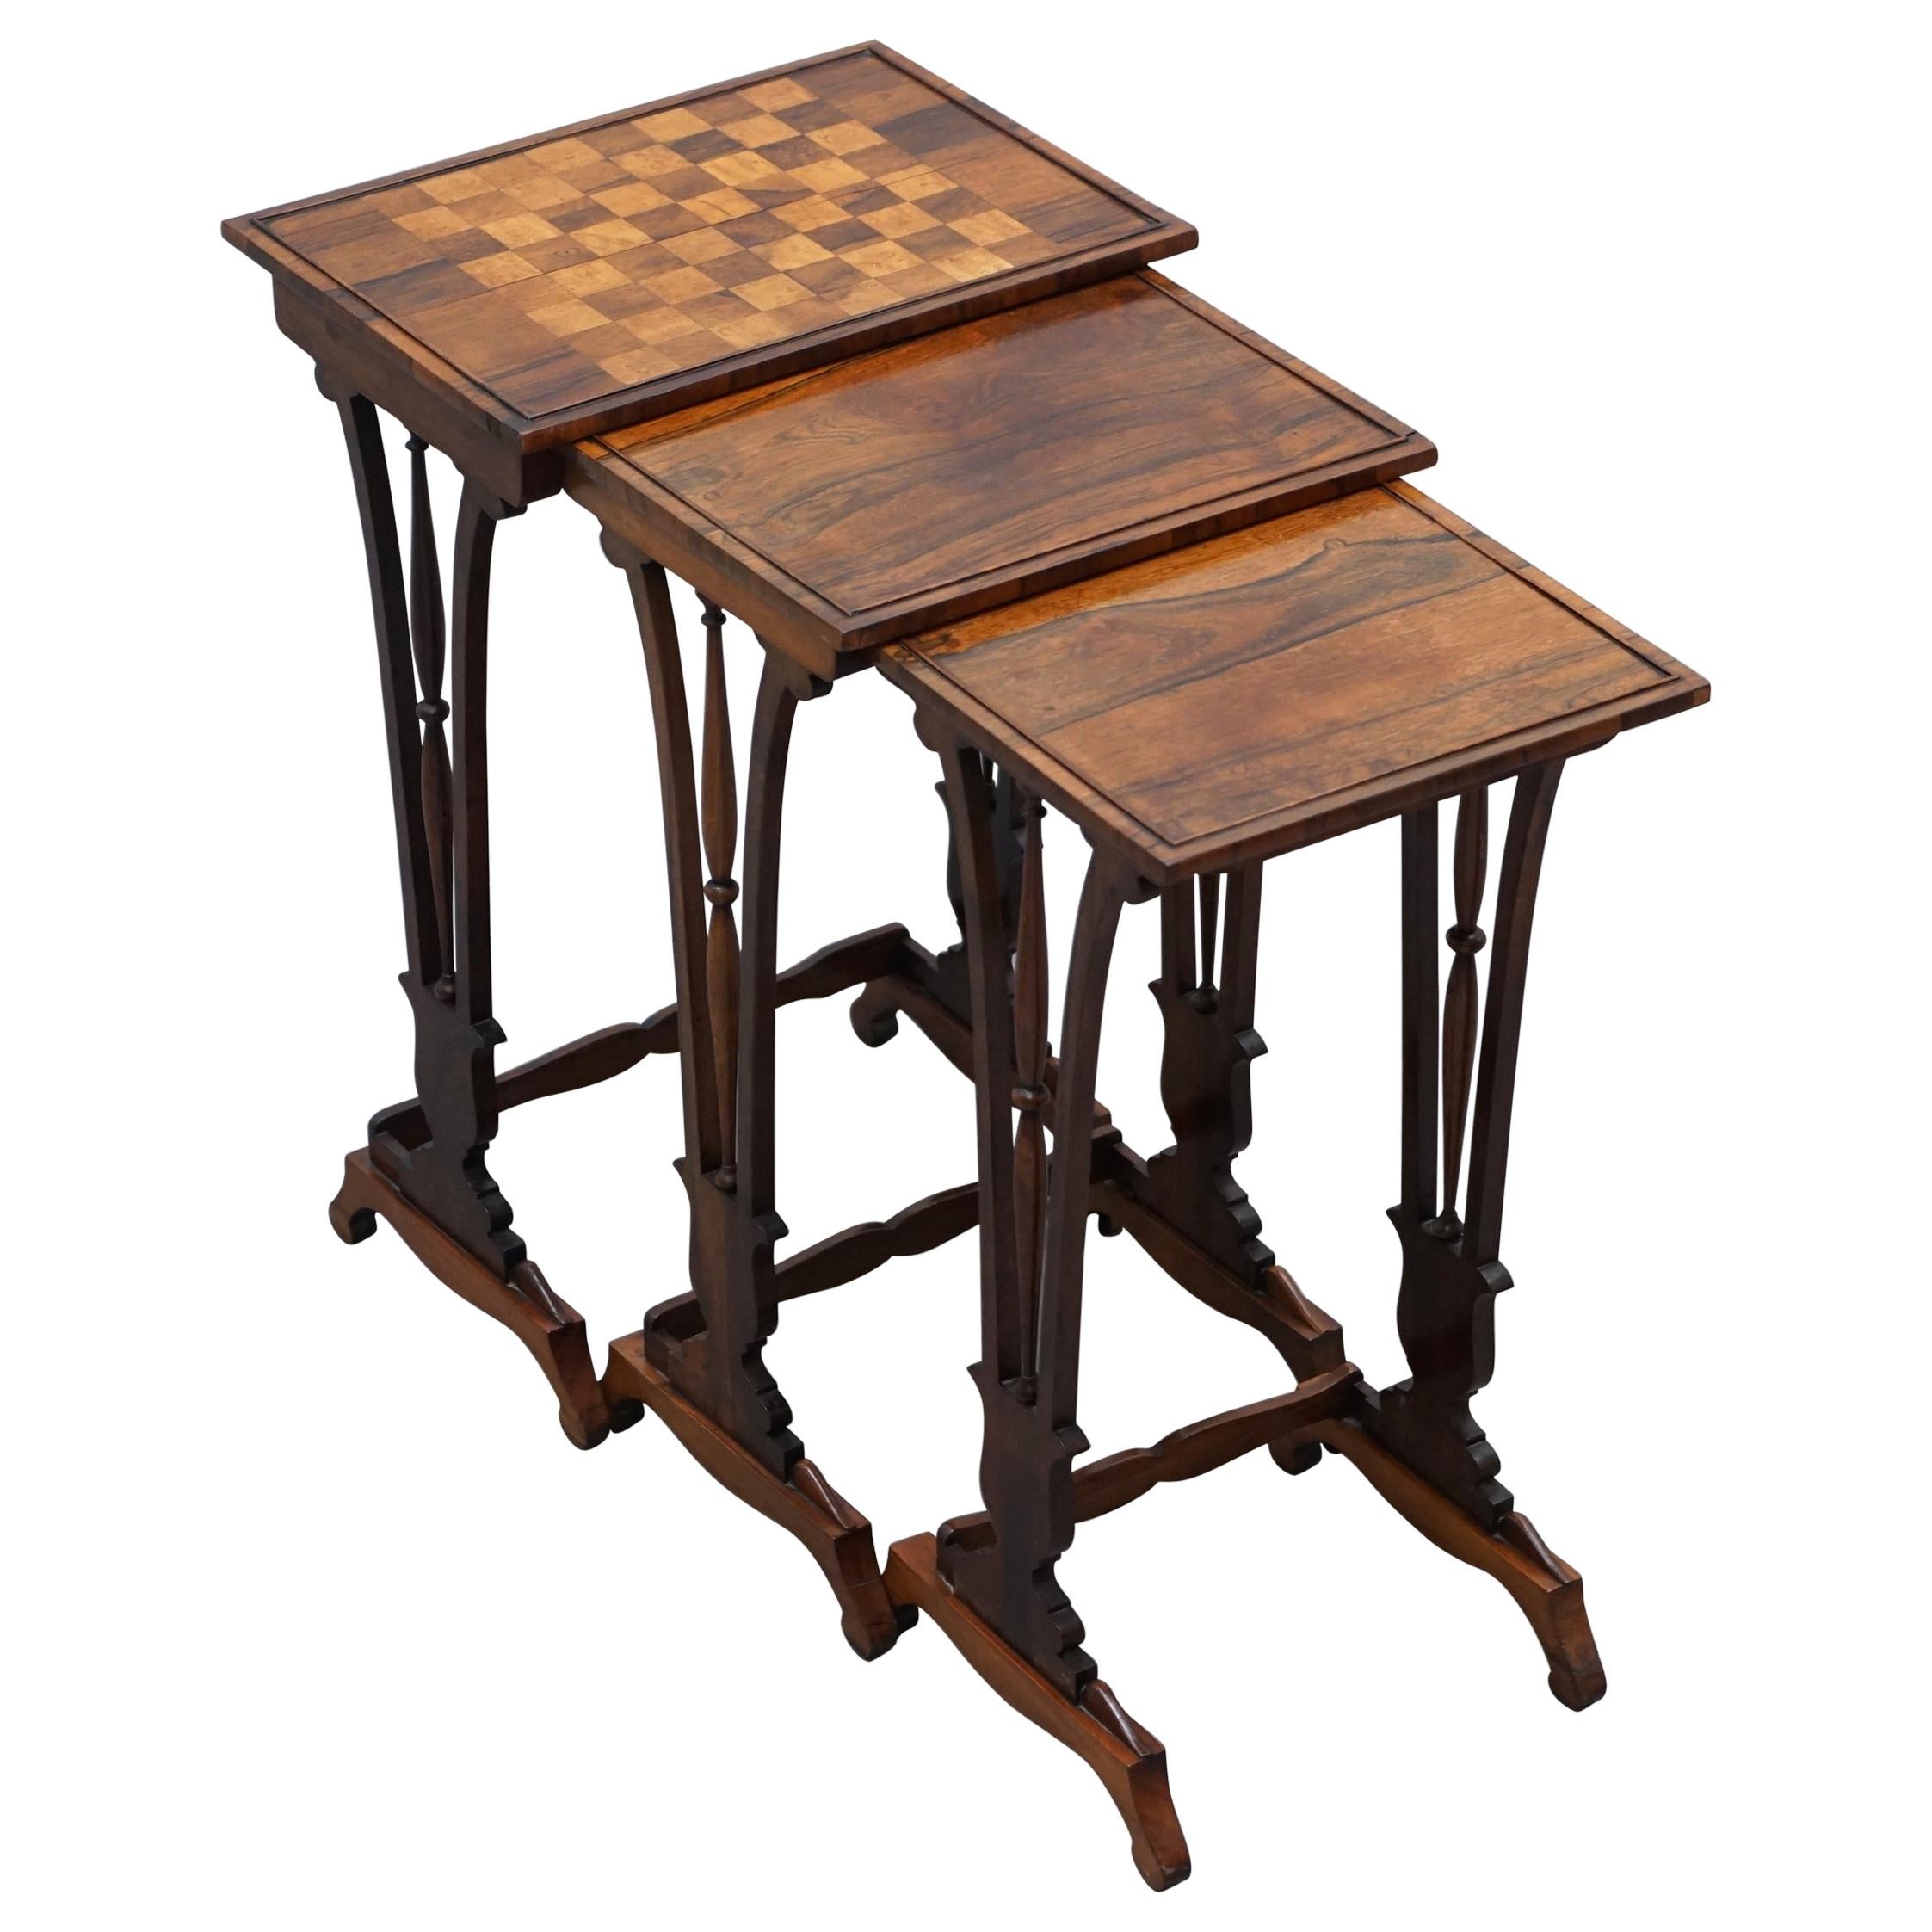 Fine Regency Nest of Hardwood Tables with Chessboard Top Attributed to Gillows